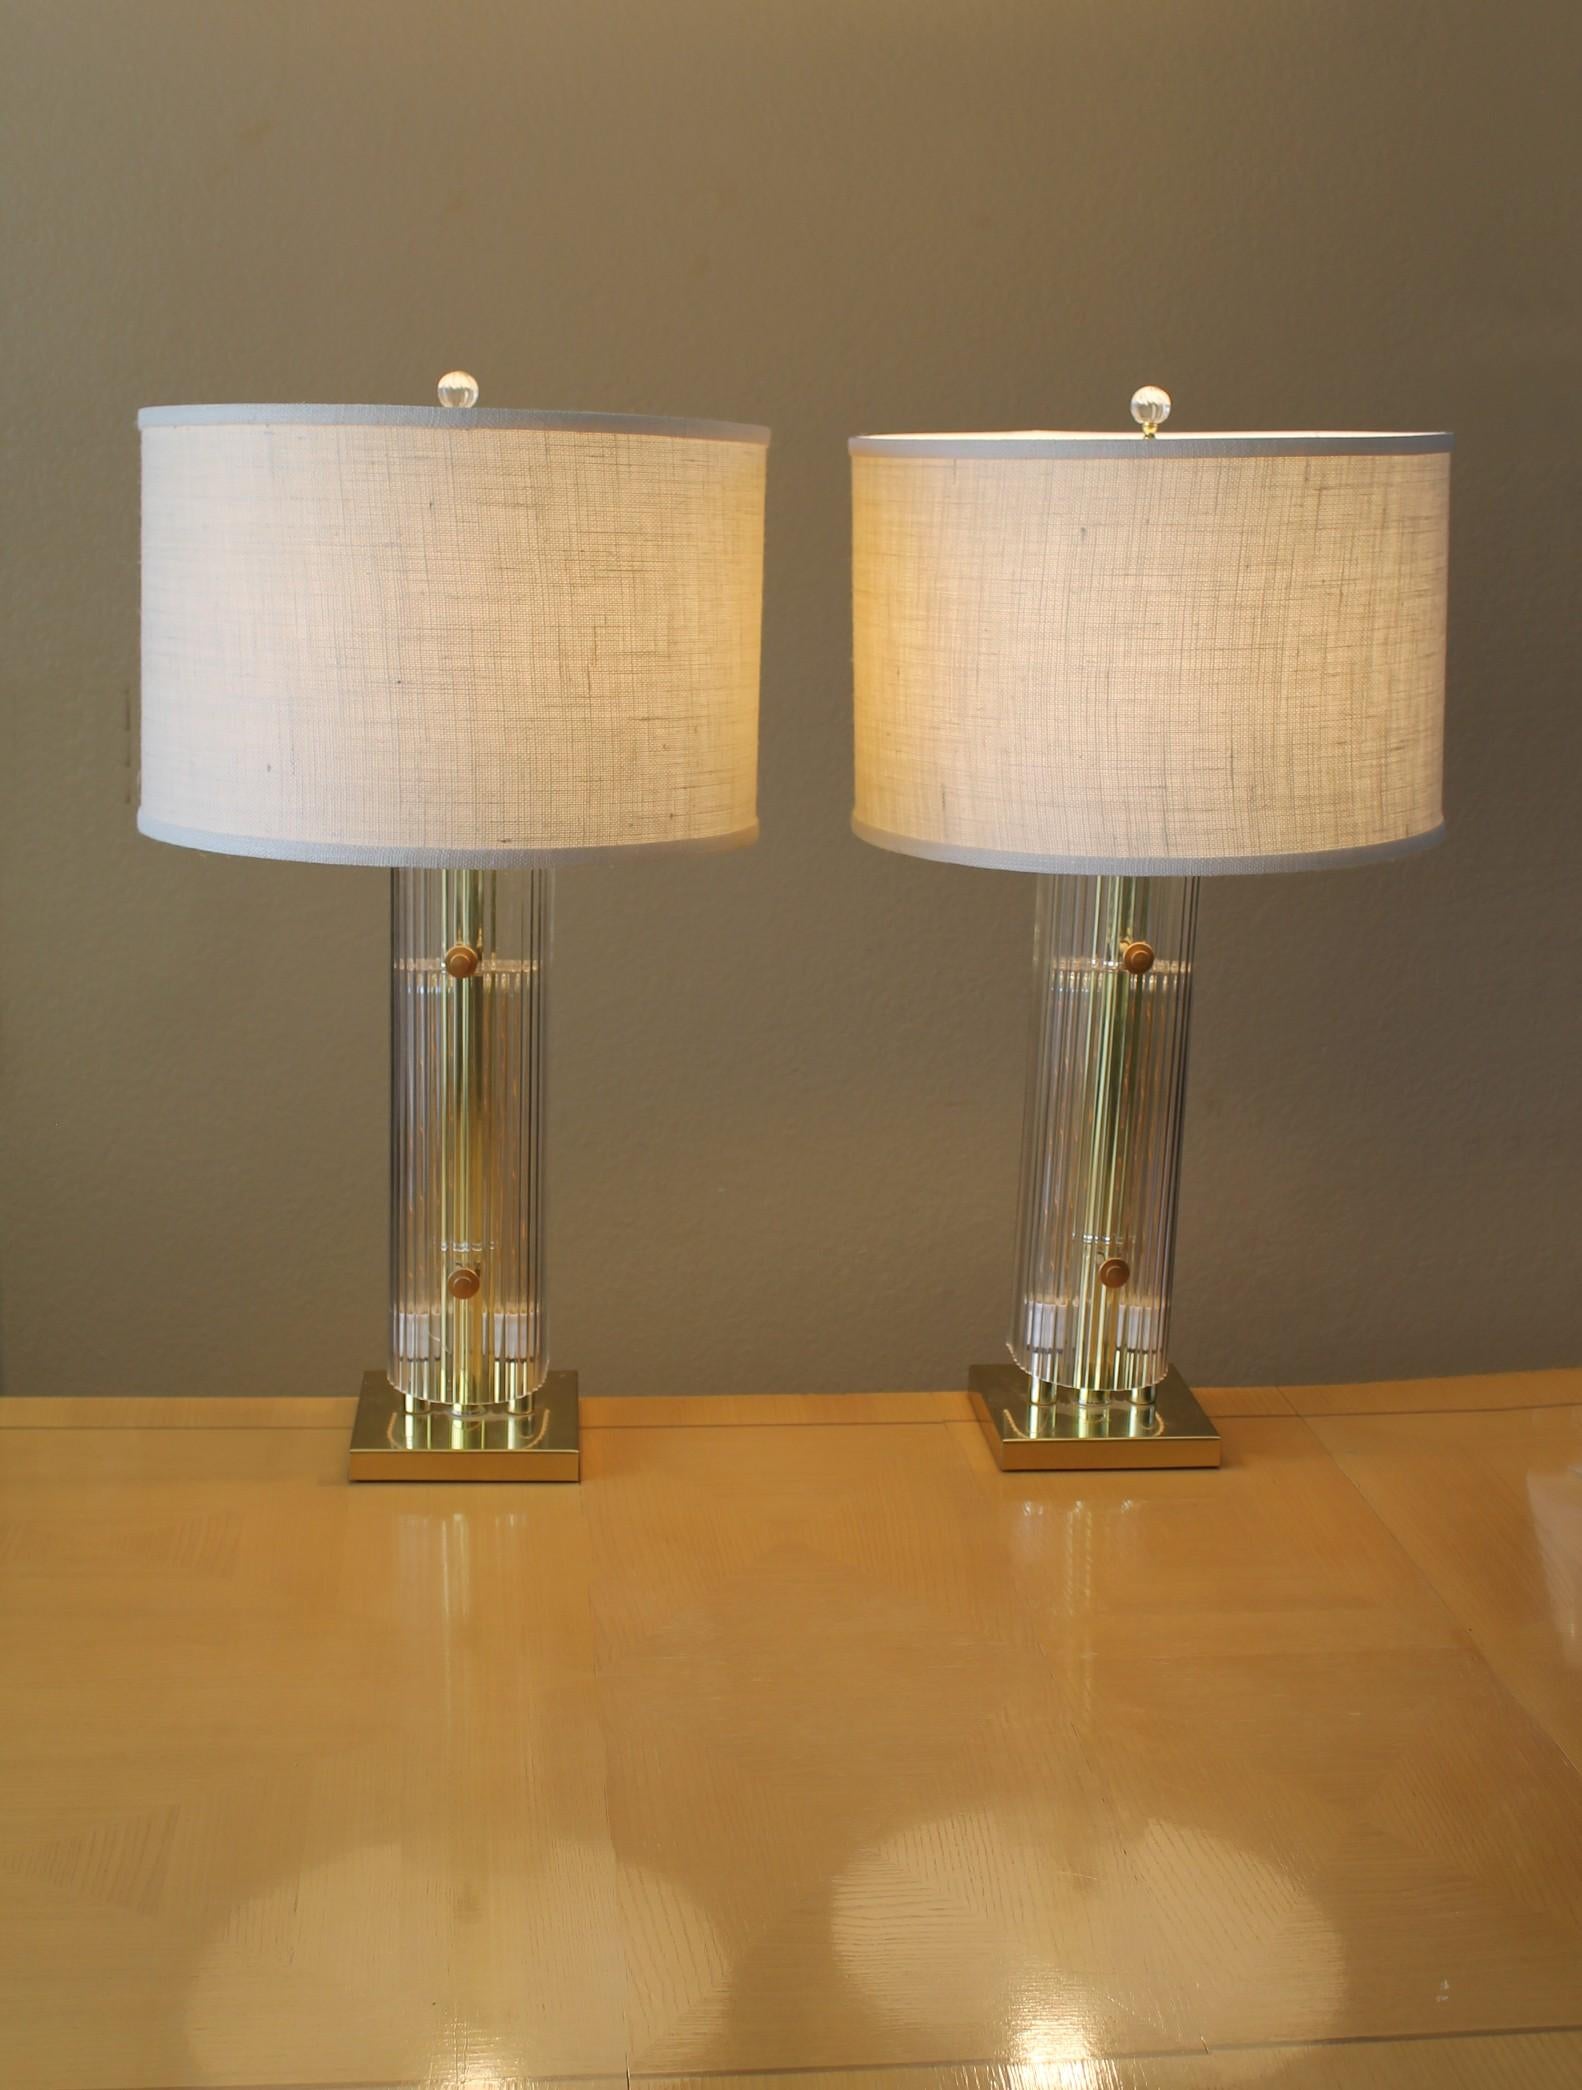 Polychromed Rare Pair! Art Deco Revival Lucite 3 Way Light up Base 1970s Decorator Lamps! For Sale